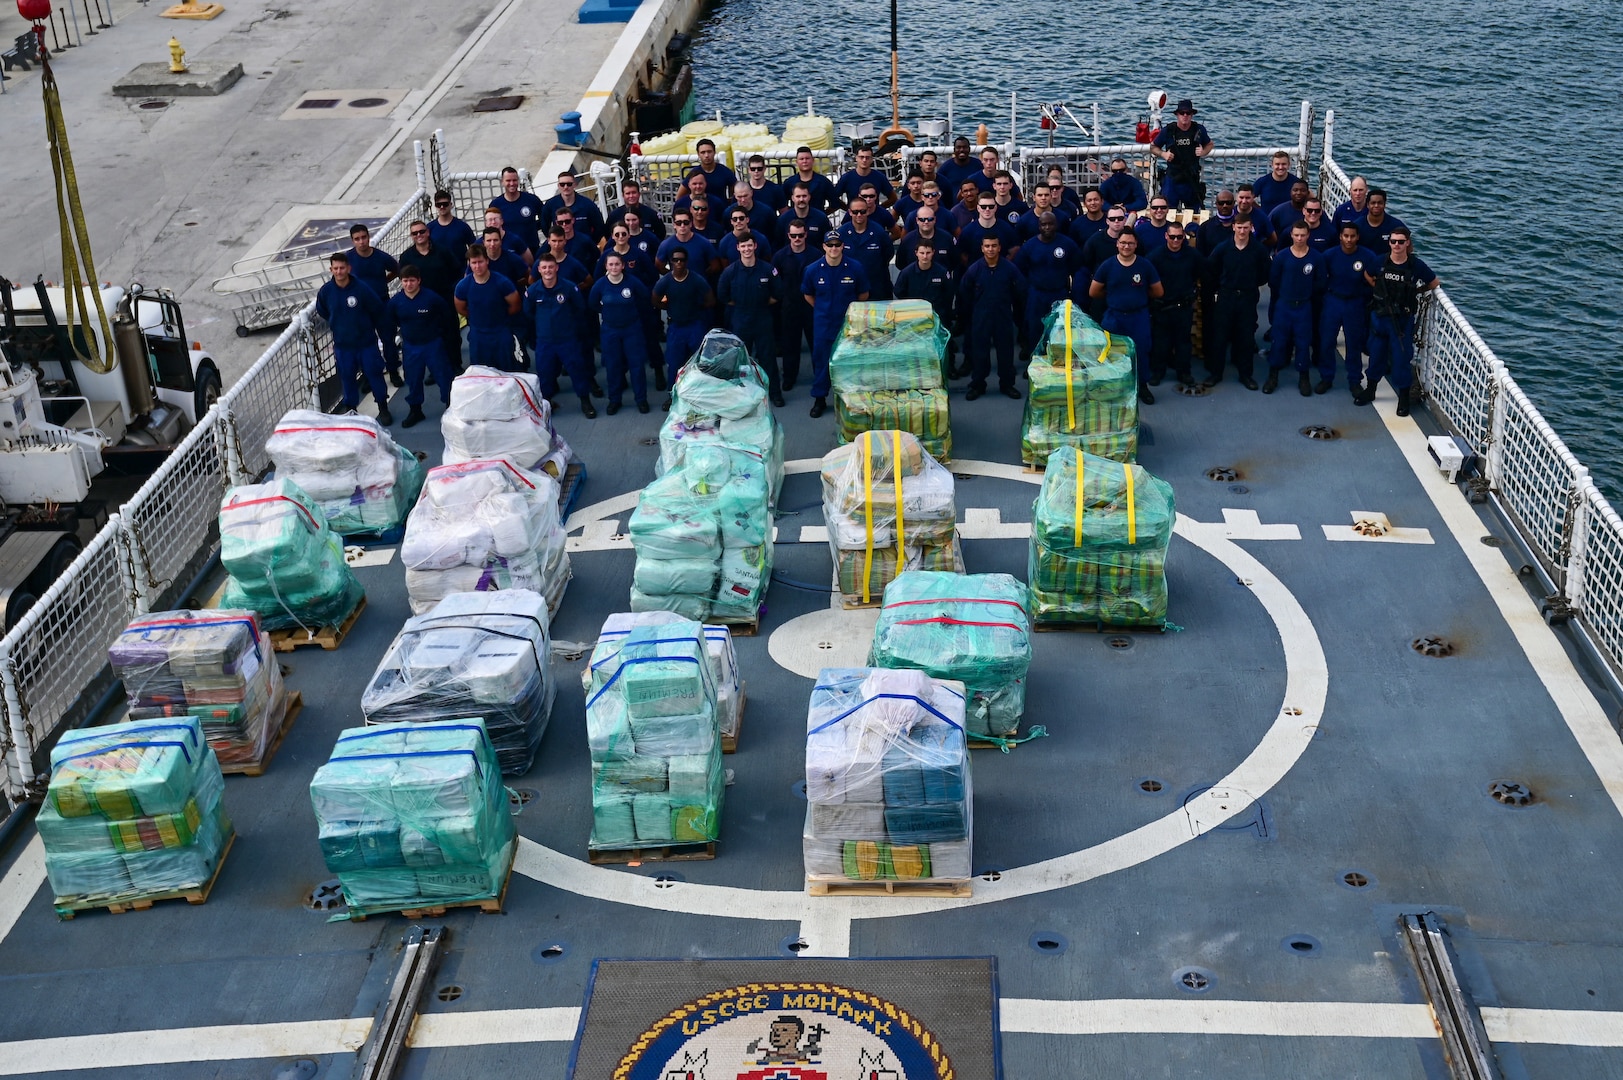 U.S. Coast Guard Cutter Mohawk (WMEC-913) crewmembers pose with approximately 18,000 pounds of illegal narcotics at Port Everglades in Fort Lauderdale, Florida, May 10, 2025. The Mohawk is homeported in Key West, Florida. (U.S. Coast Guard photo by Petty Officer 2nd Class Ryan Estrada)